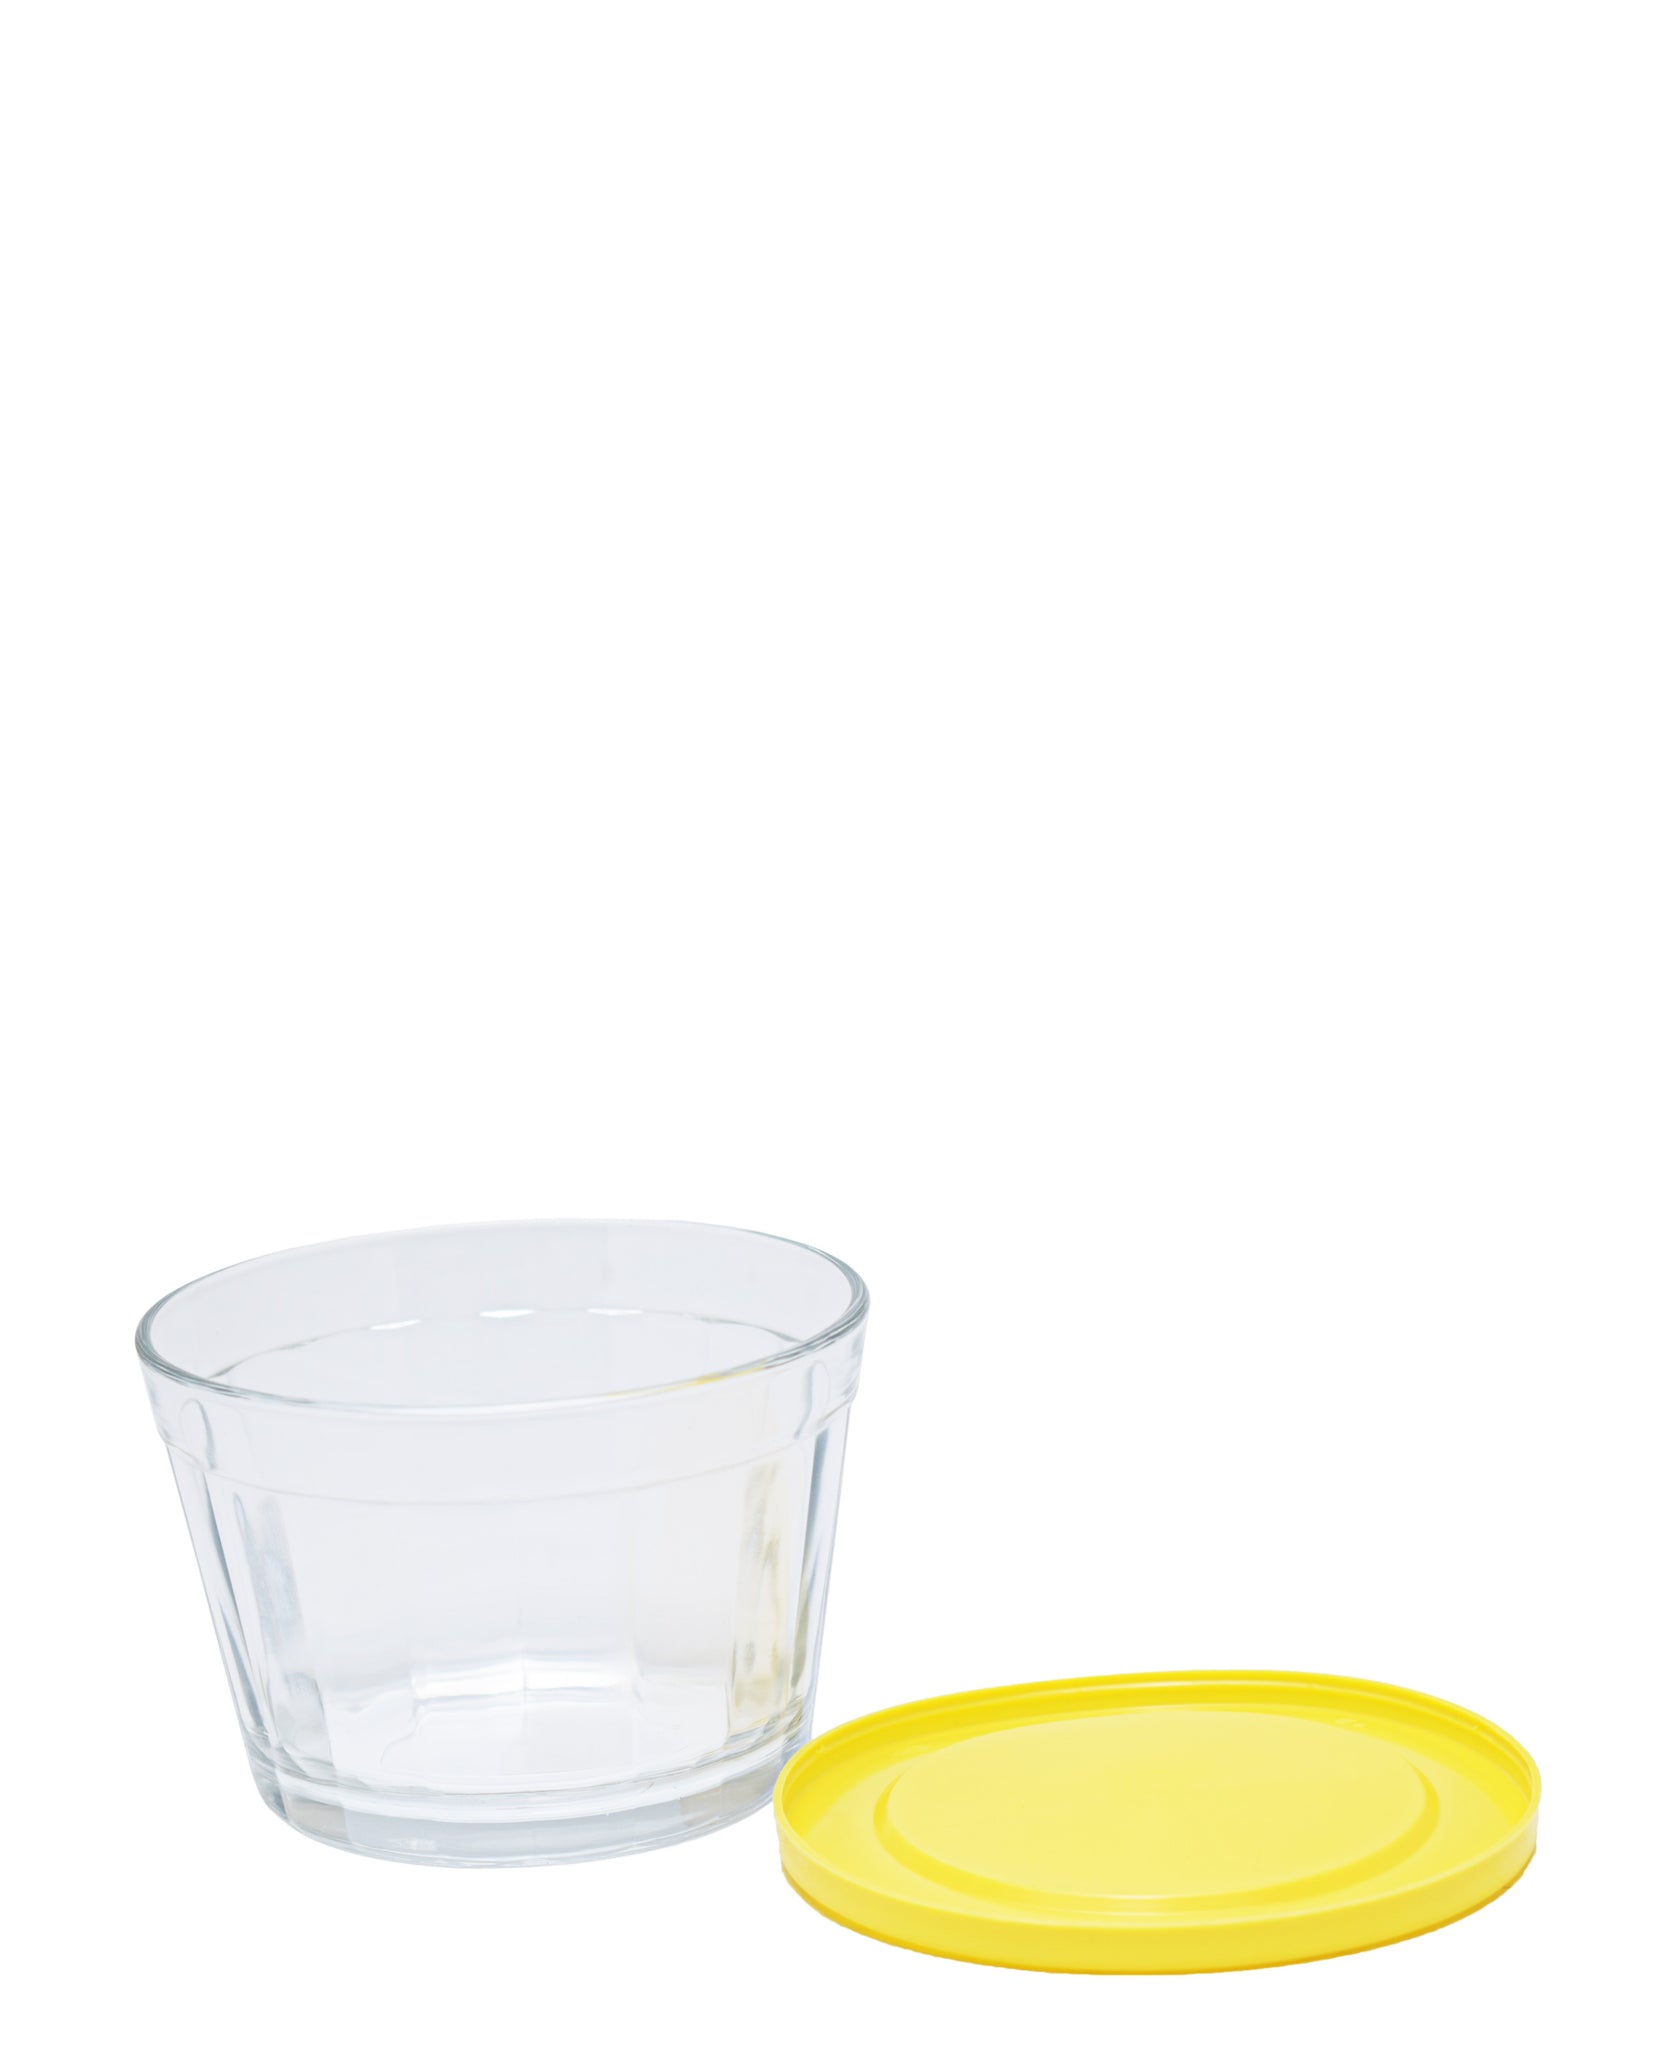 American Cup Bowl With Plastic Lid - Yellow